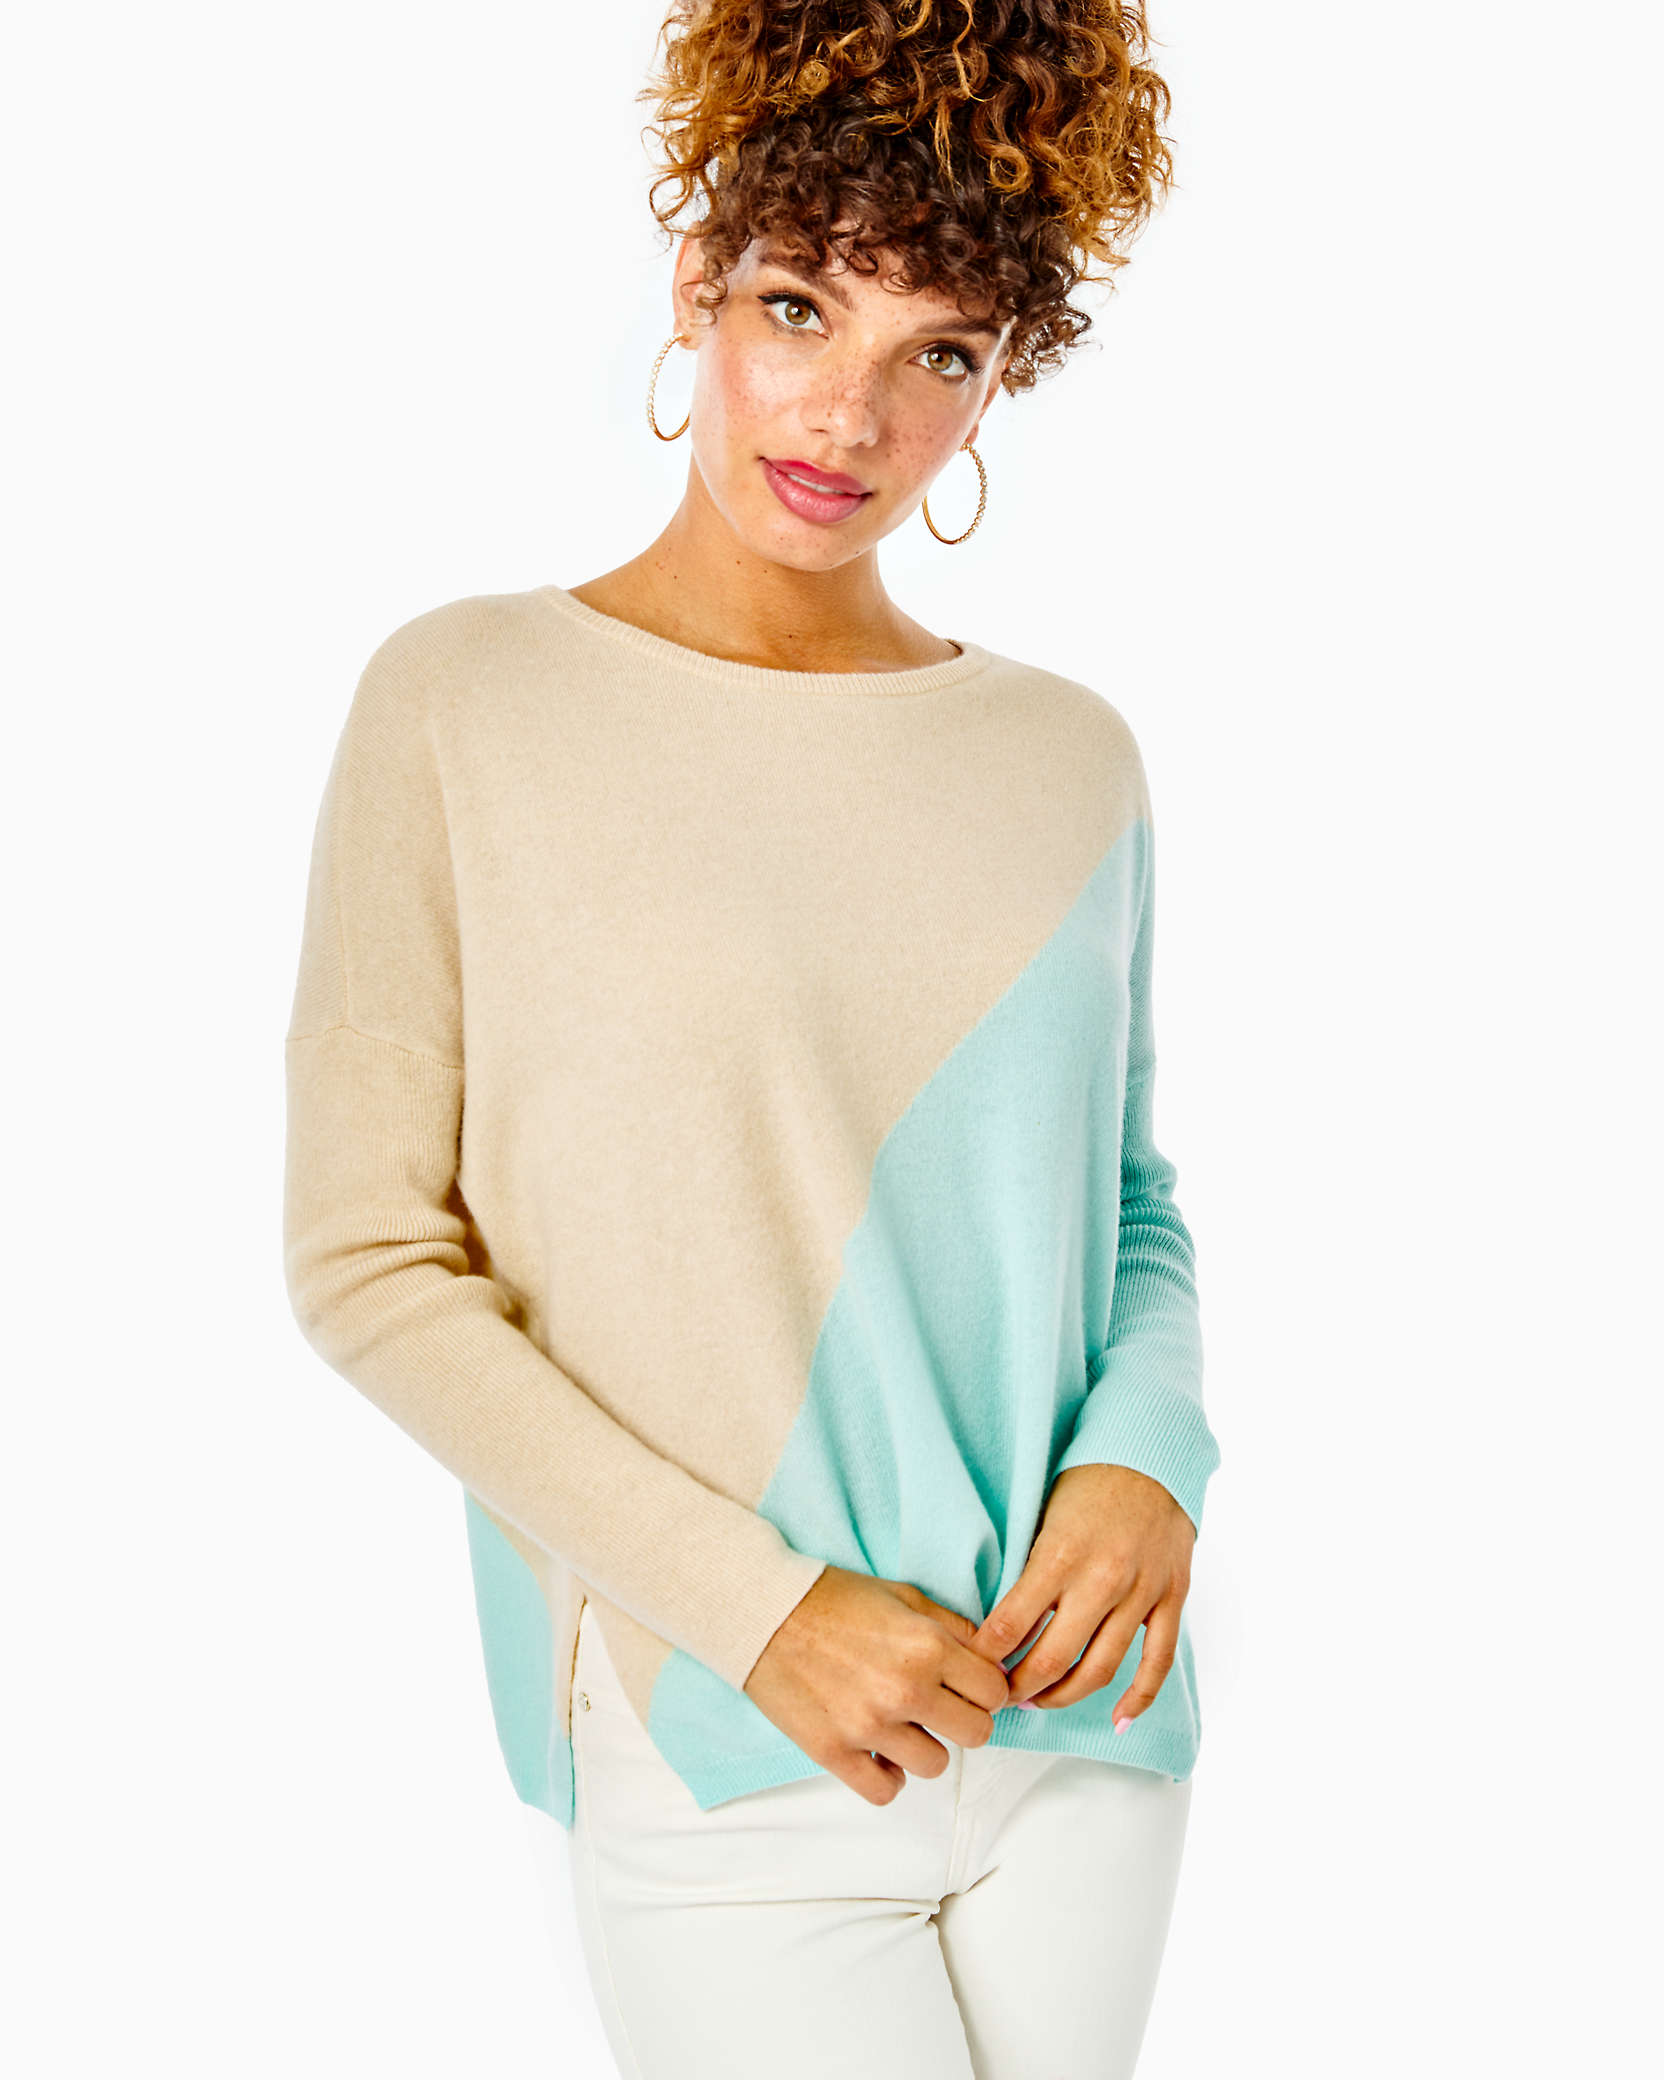 Lilly Pulitzer Napa Cashmere Sweater In Seasalt Blue Diagonal Colorblock